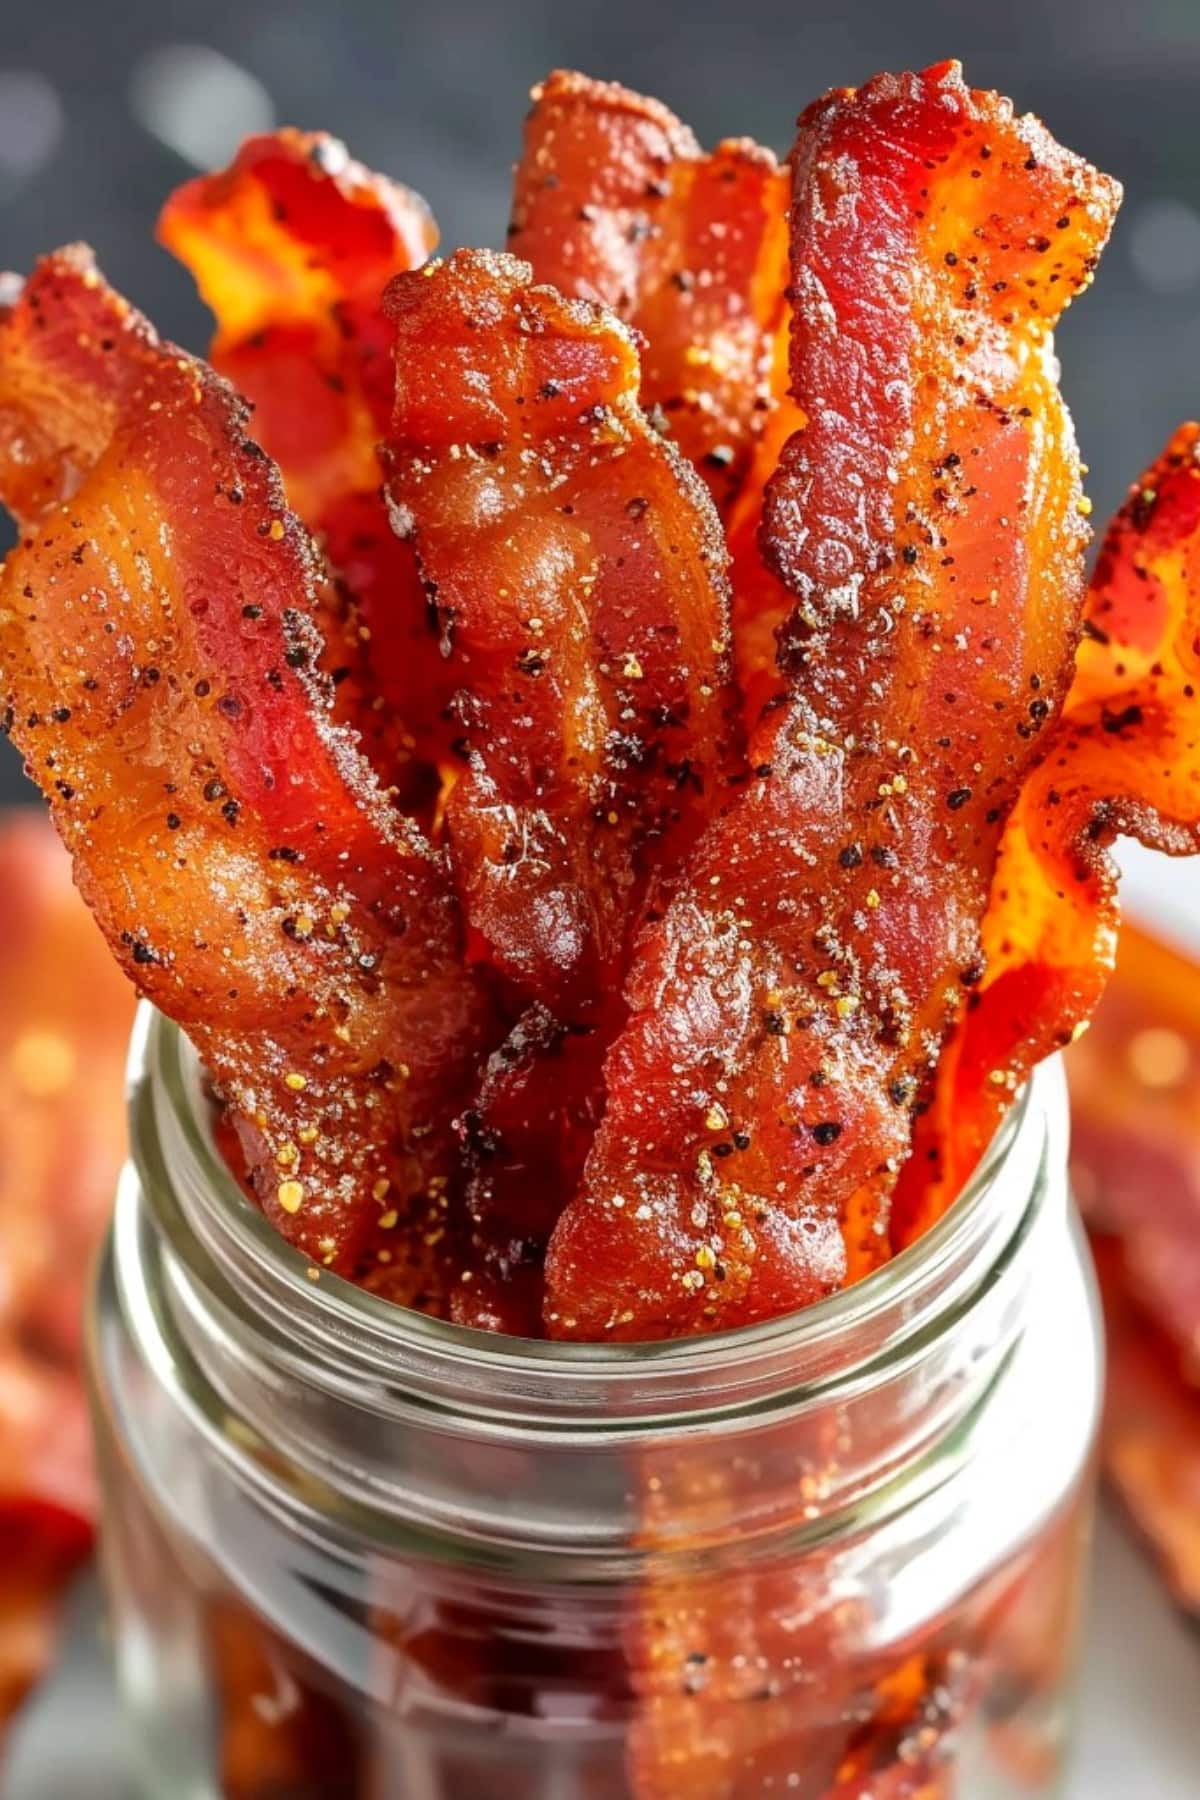 Sweet and salty homemade candied bacon in a glass jar